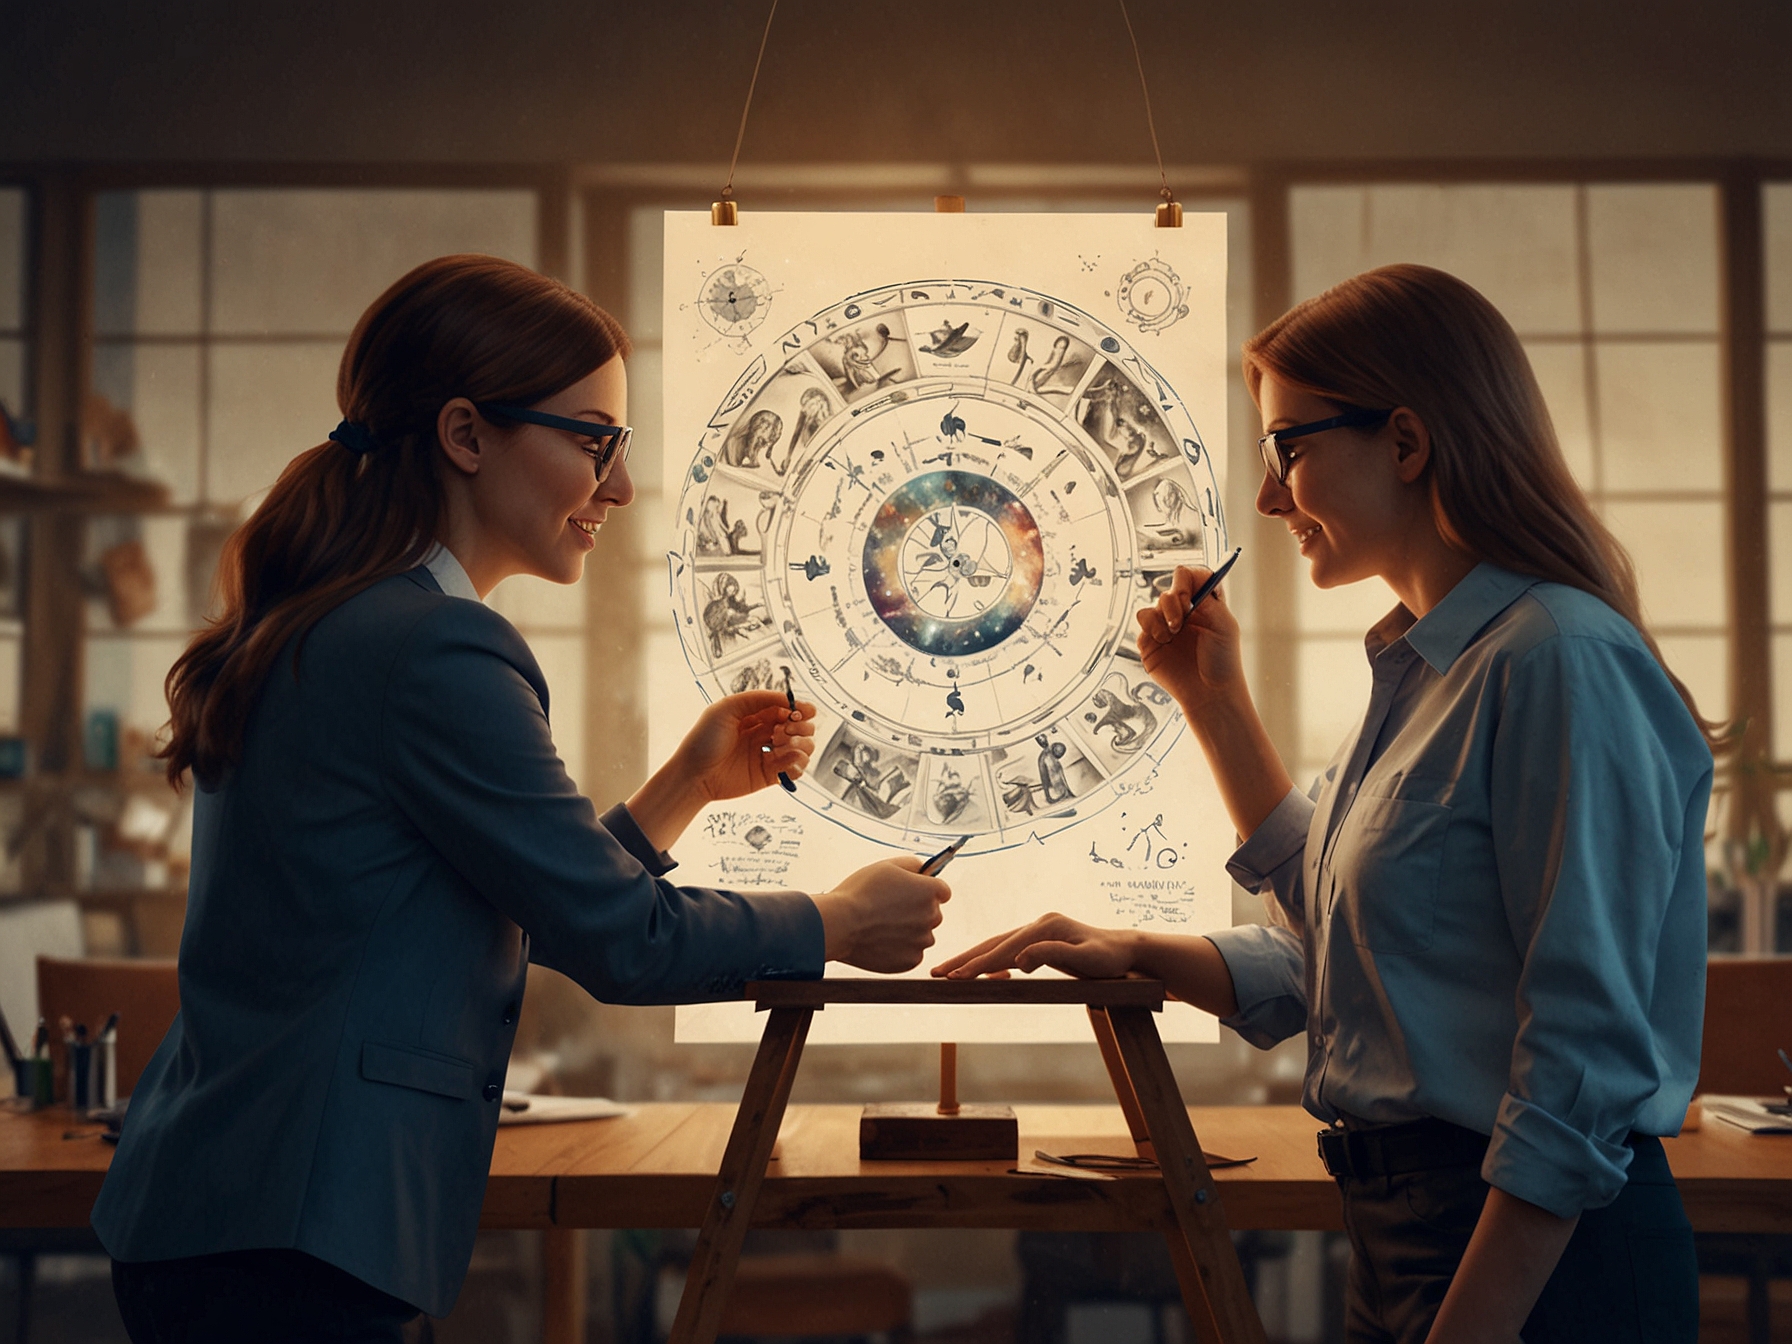 A group of colleagues collaborating on a project, showcasing the importance of teamwork and communication as highlighted for Cancer's career success in the horoscope.